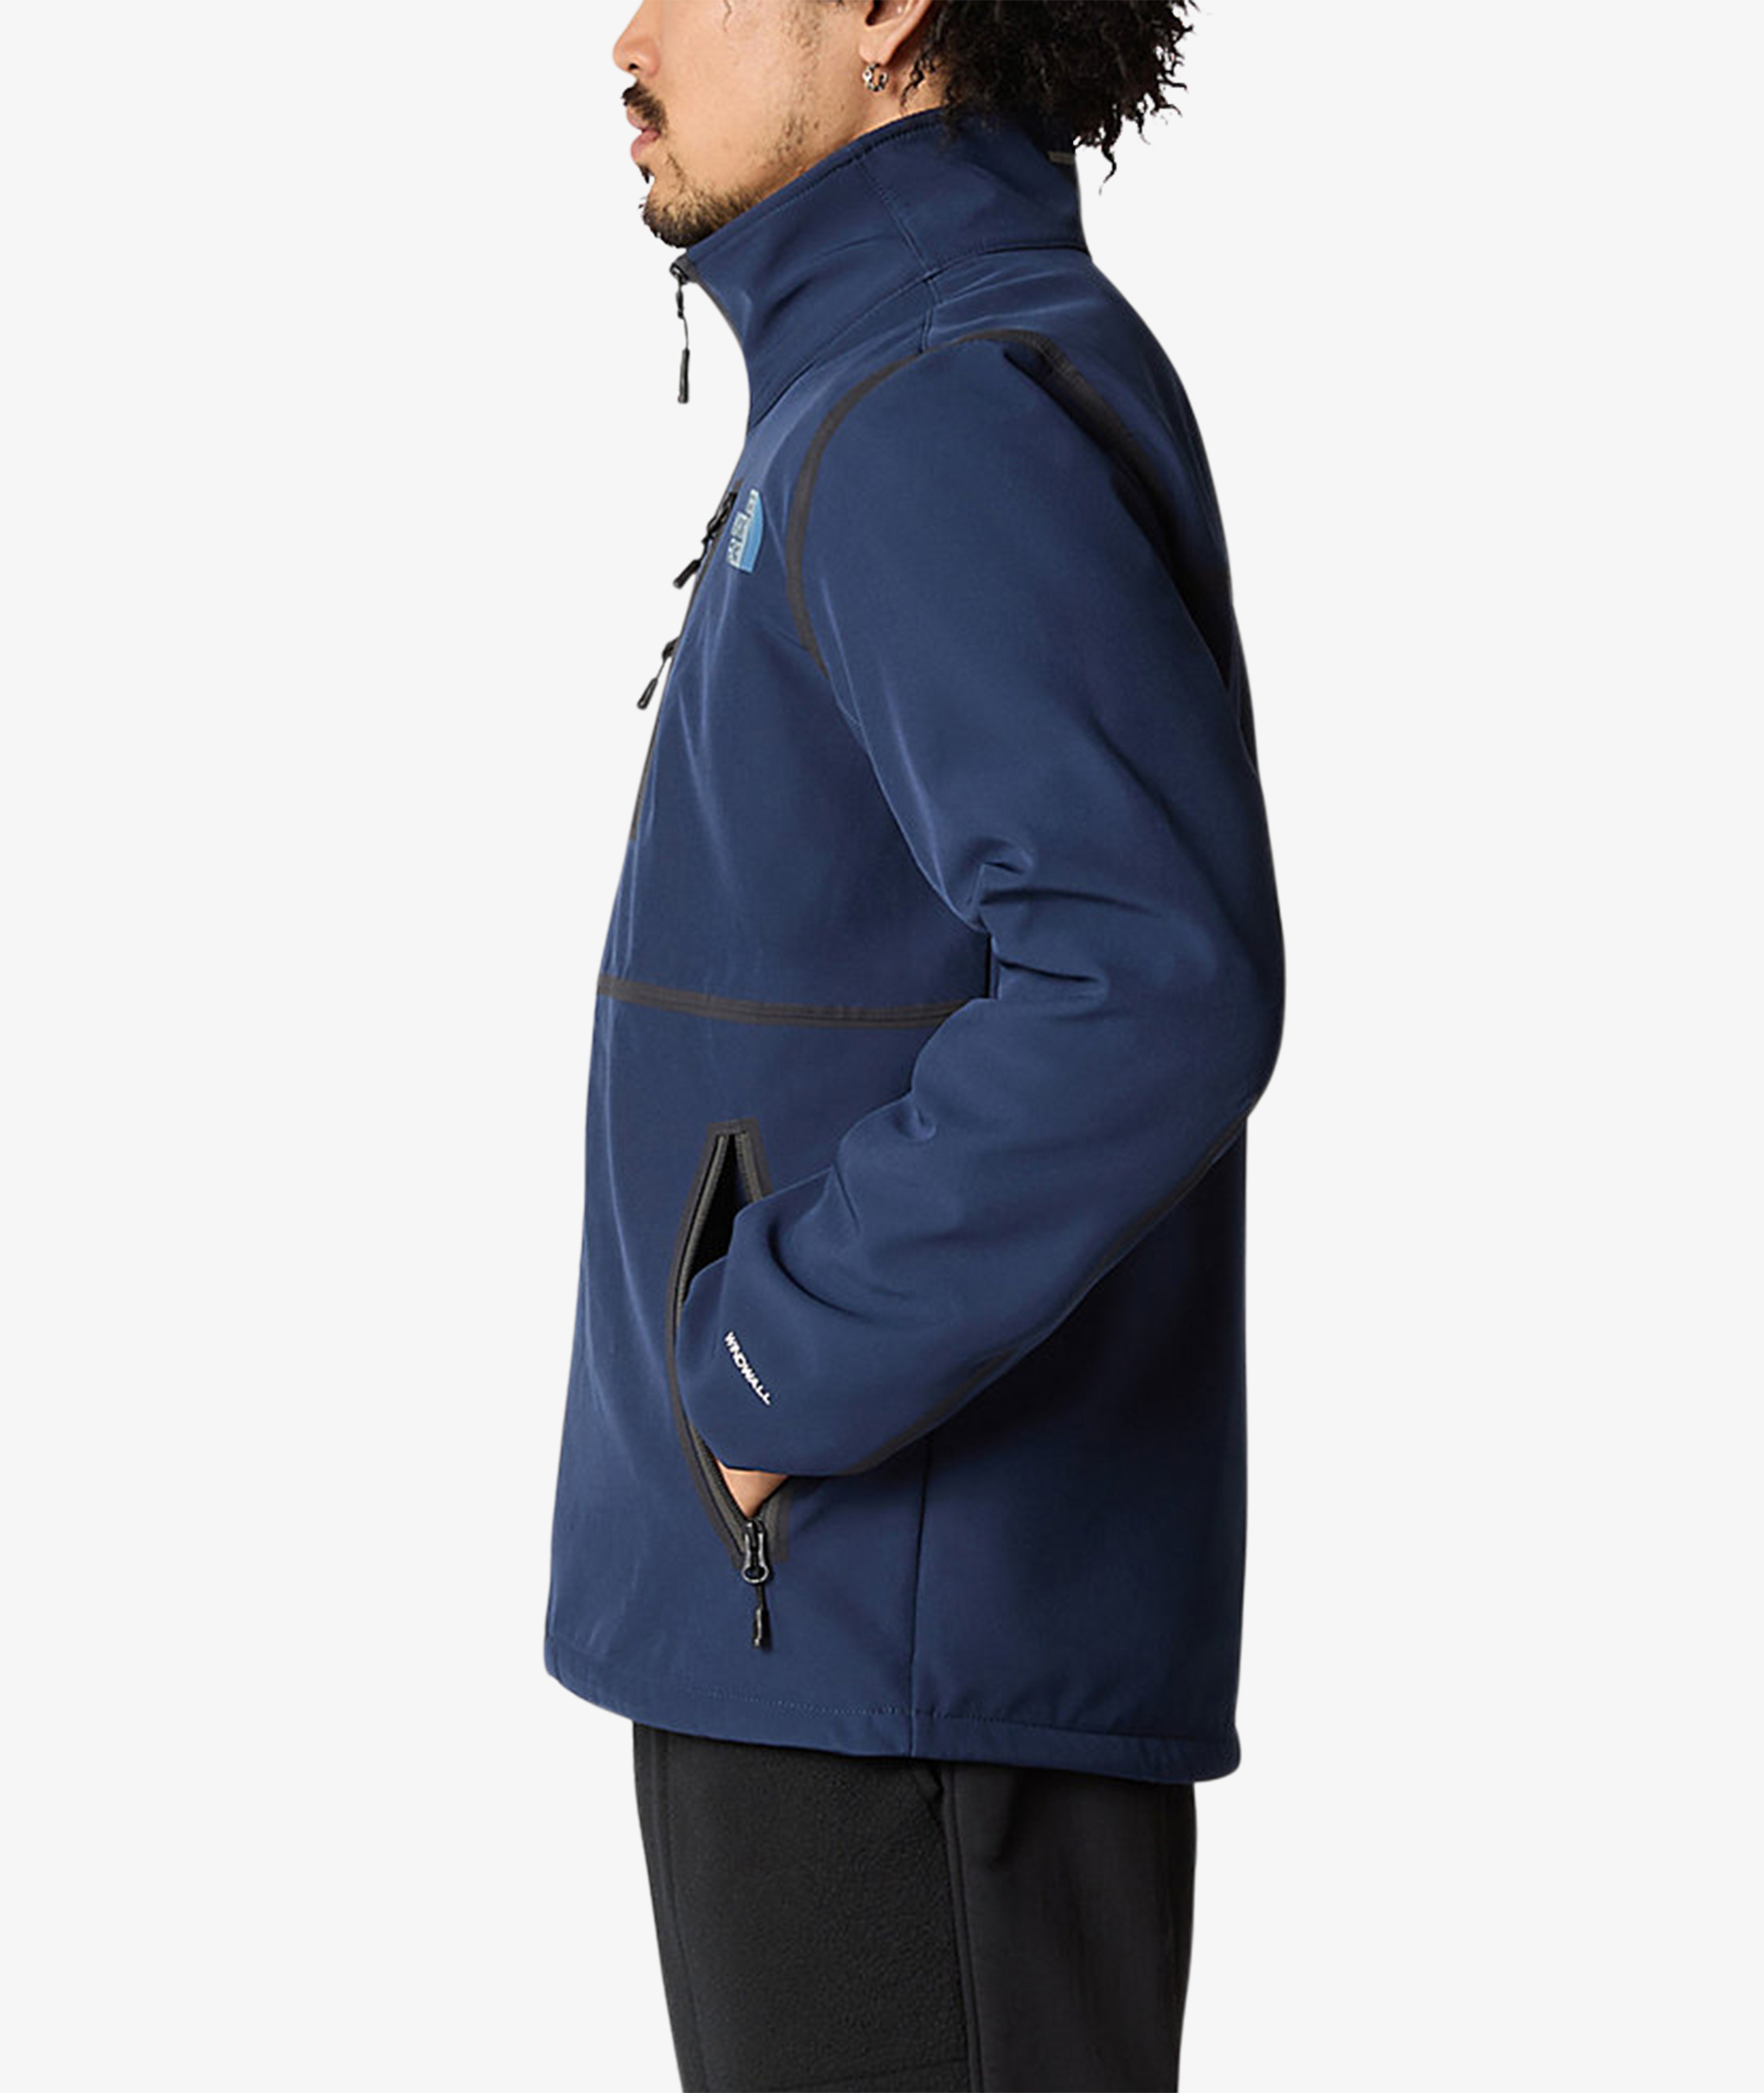 Norse Store  Shipping Worldwide - The North Face RMST DENALI JKT - SUMMIT  NAVY/SIL